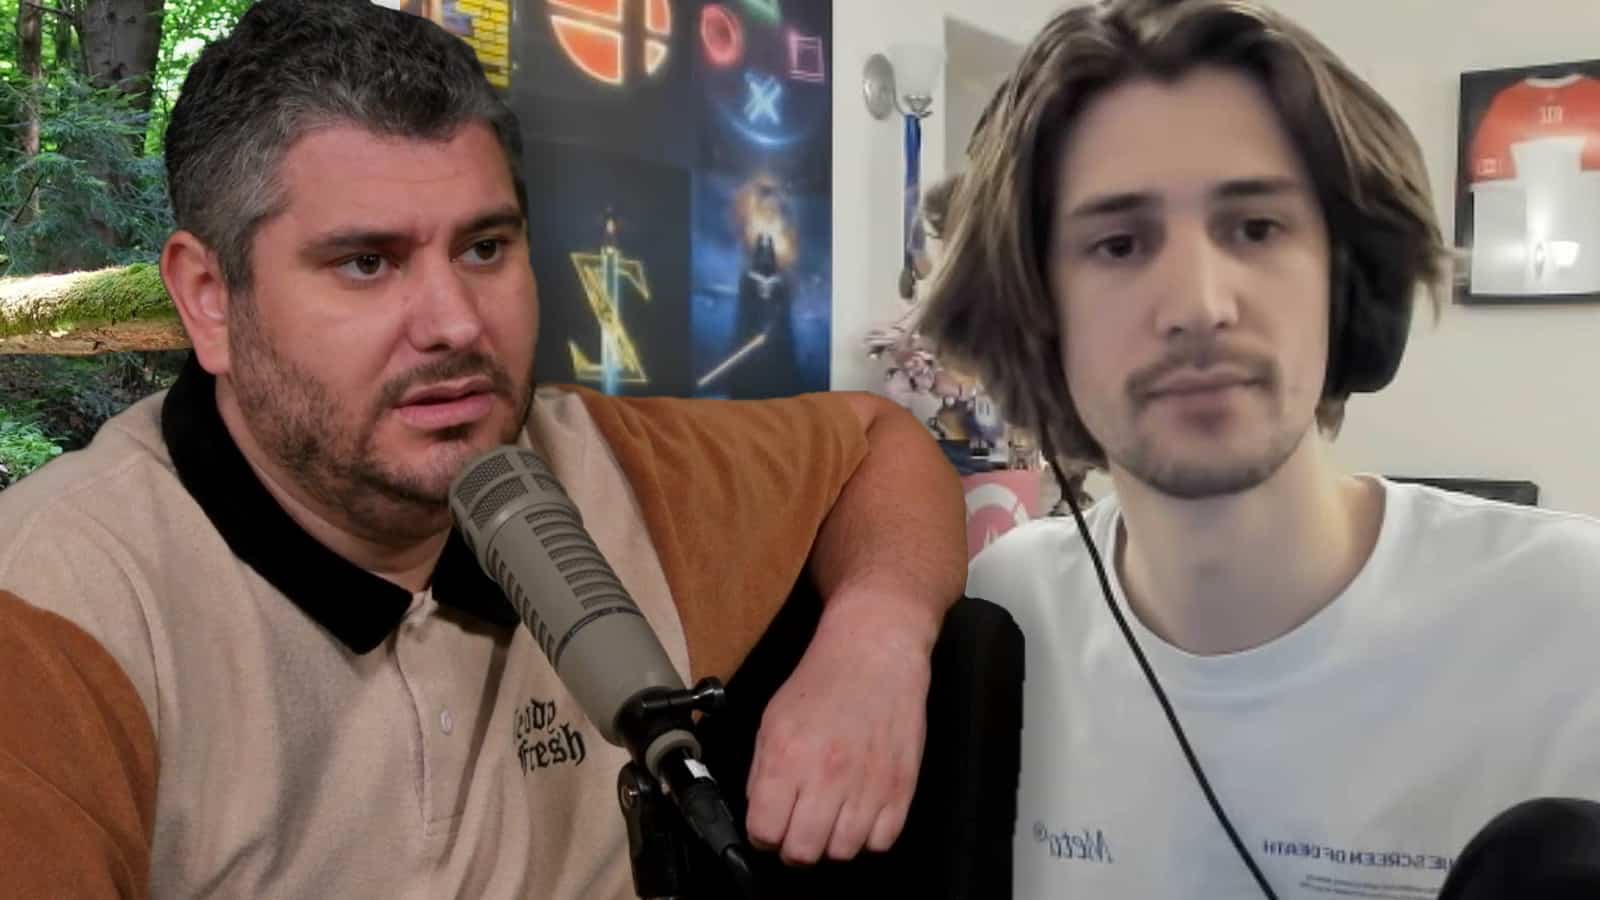 Ethan Klein explains why he's "nervous" for xQc after Twitch attorney comments